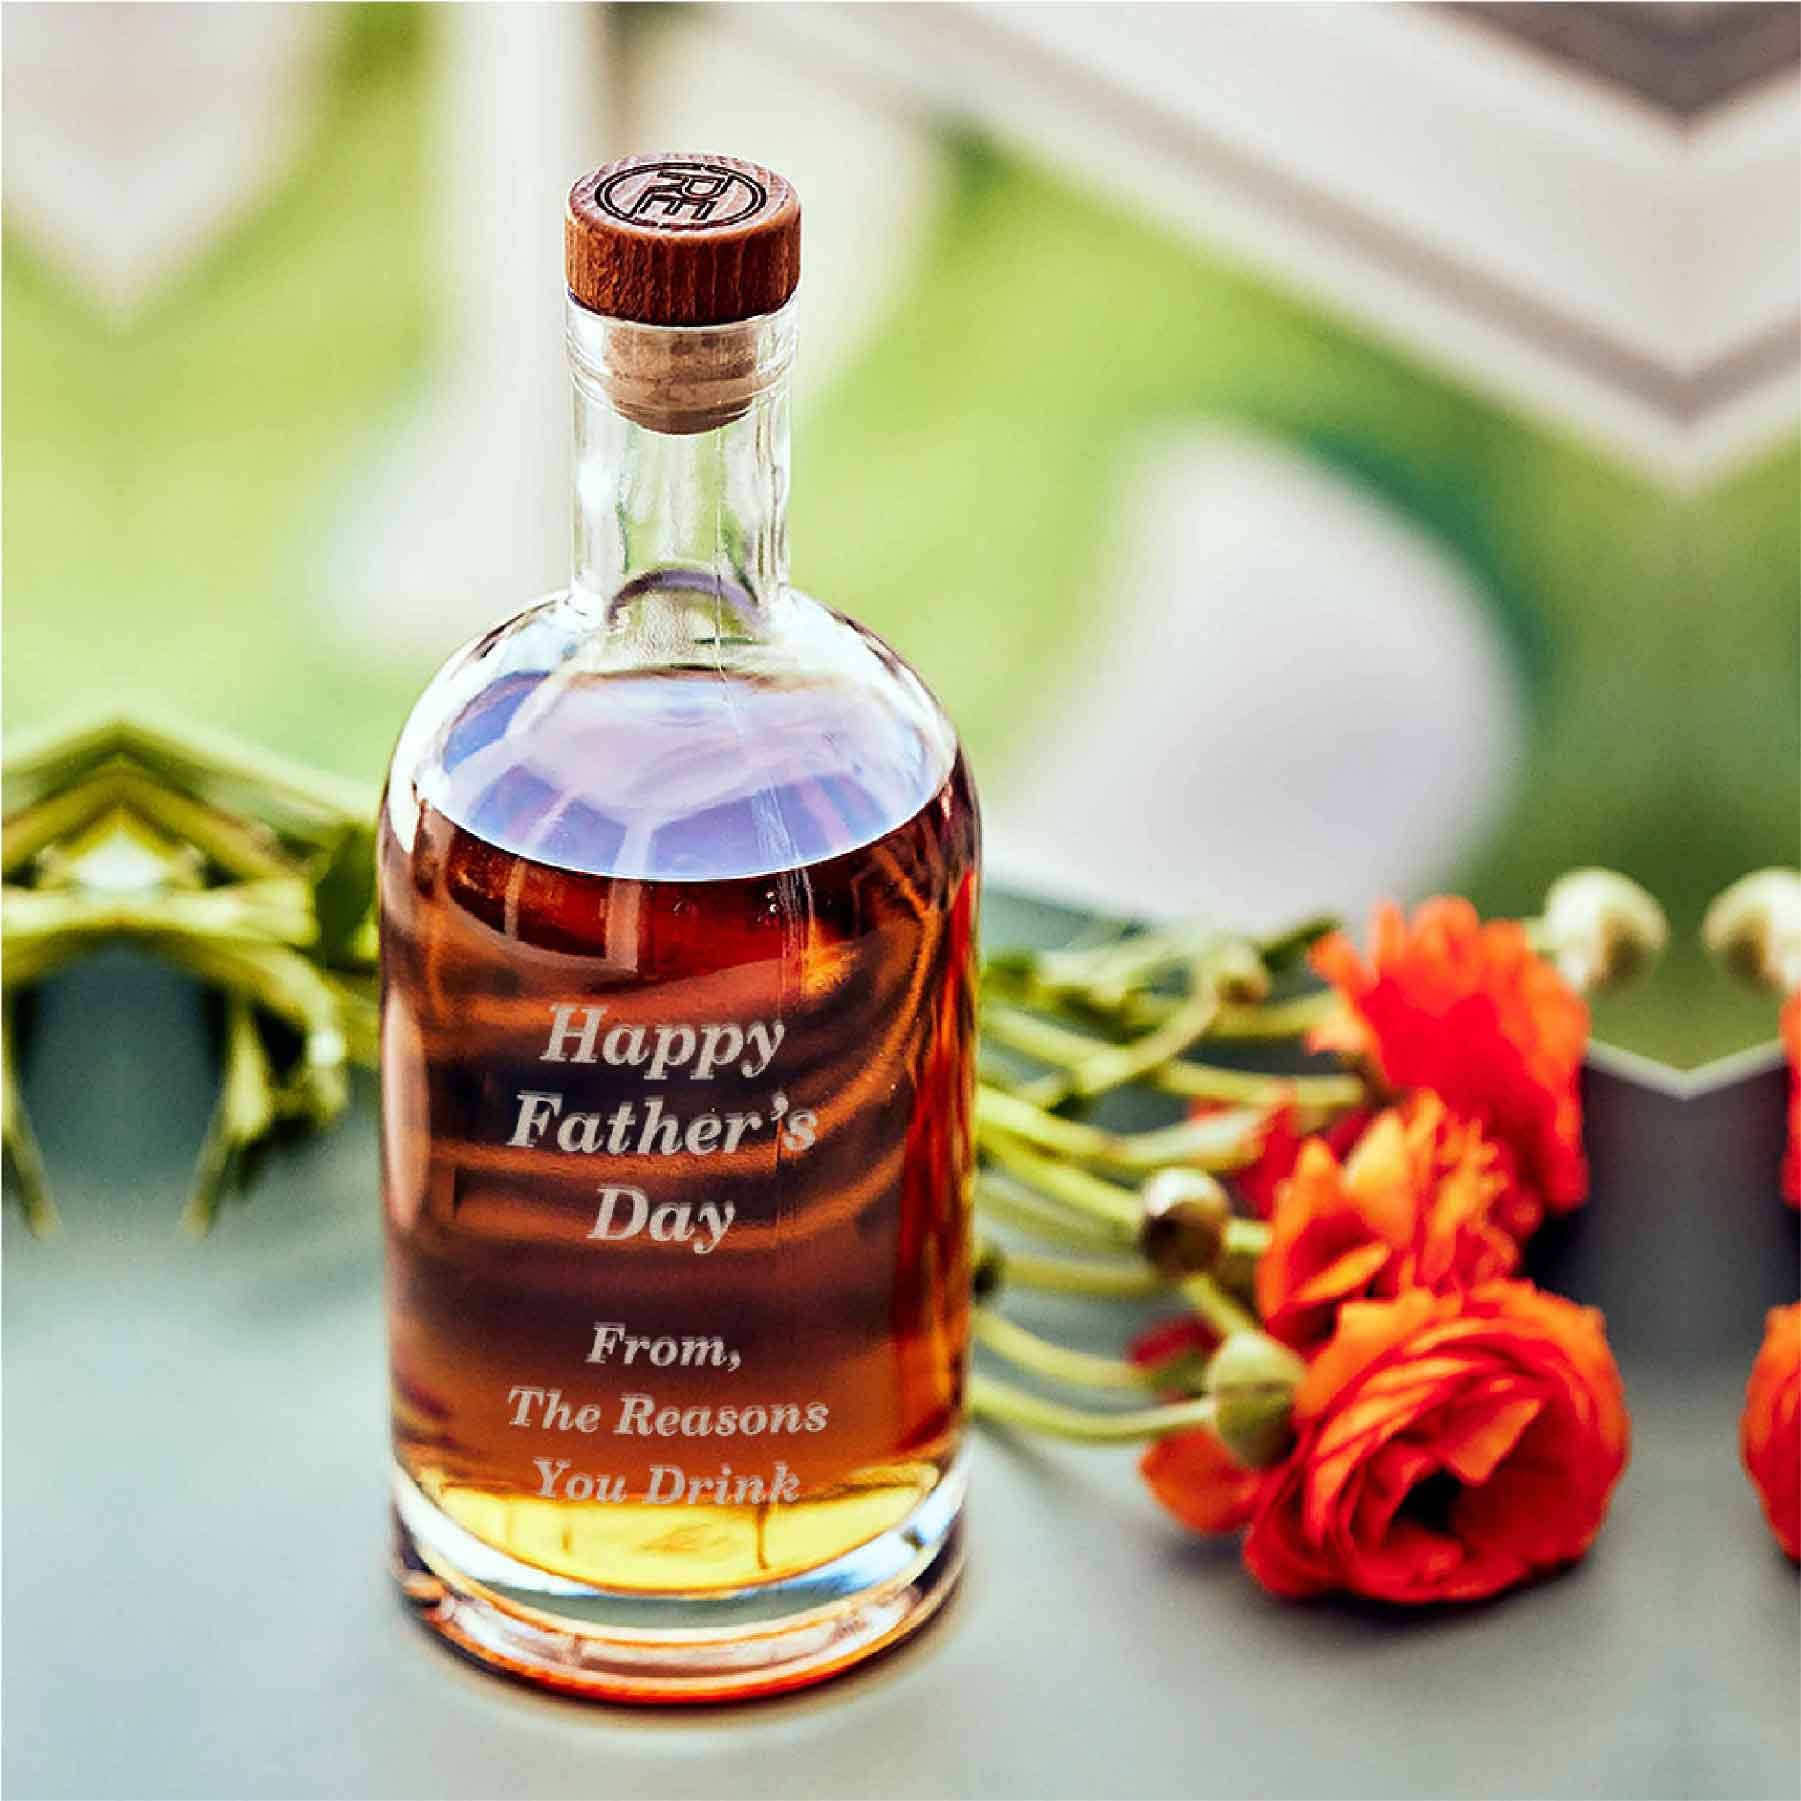 Father's Day Decanter | The Reasons You Drink